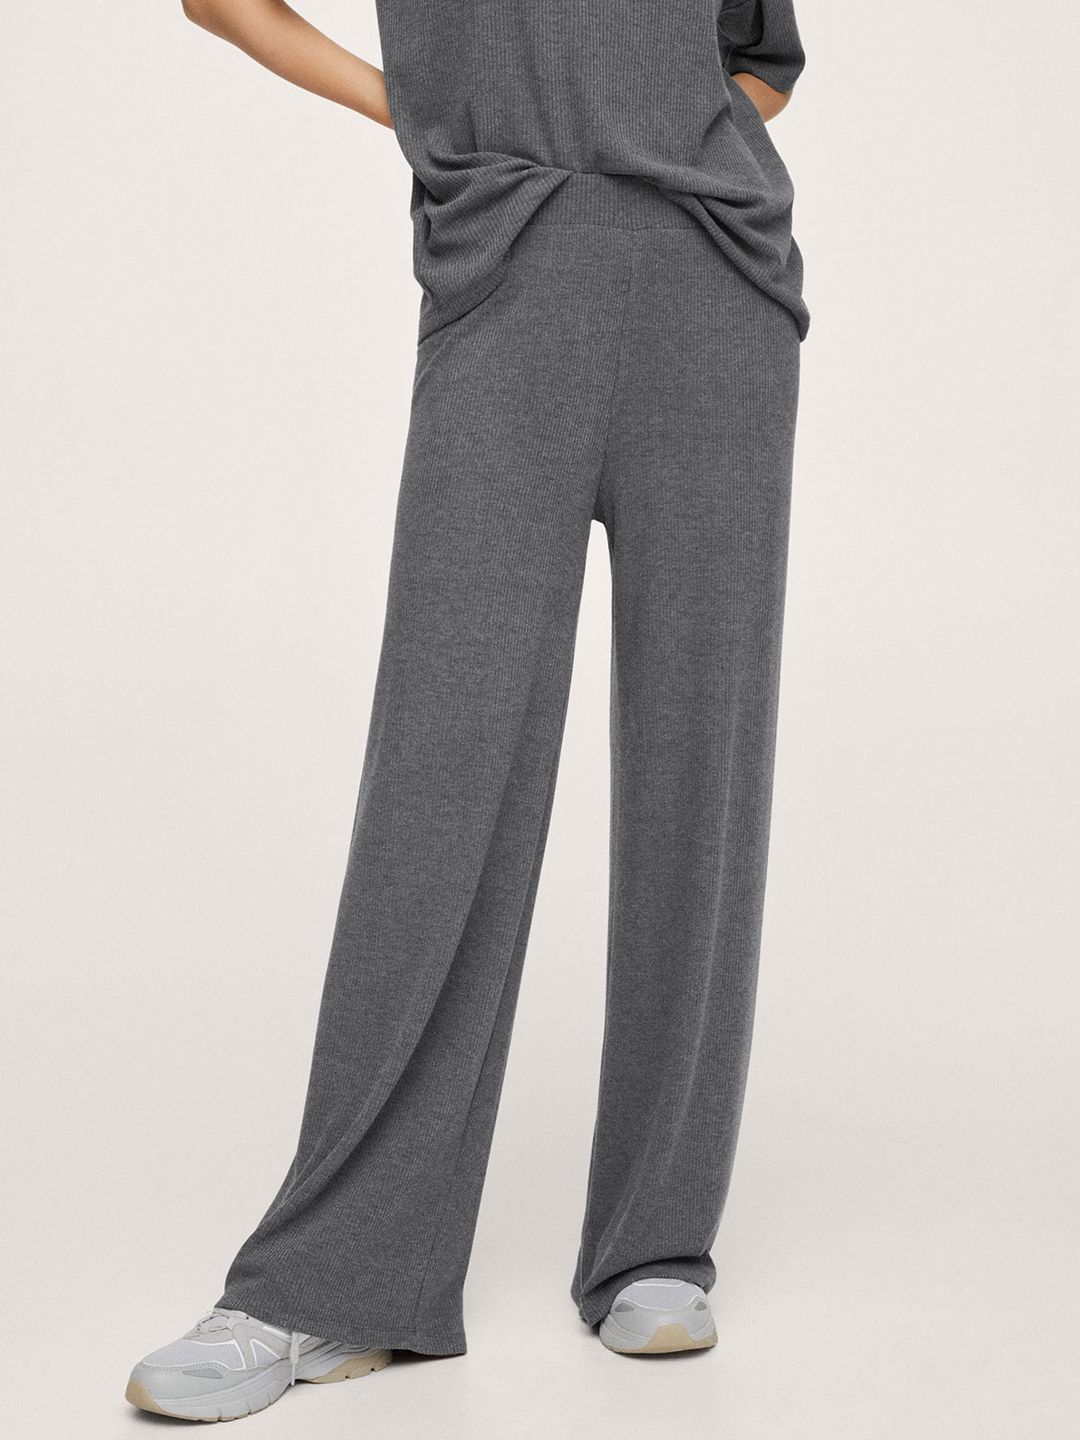 MANGO Women Grey Ribbed Knit Trousers Price in India